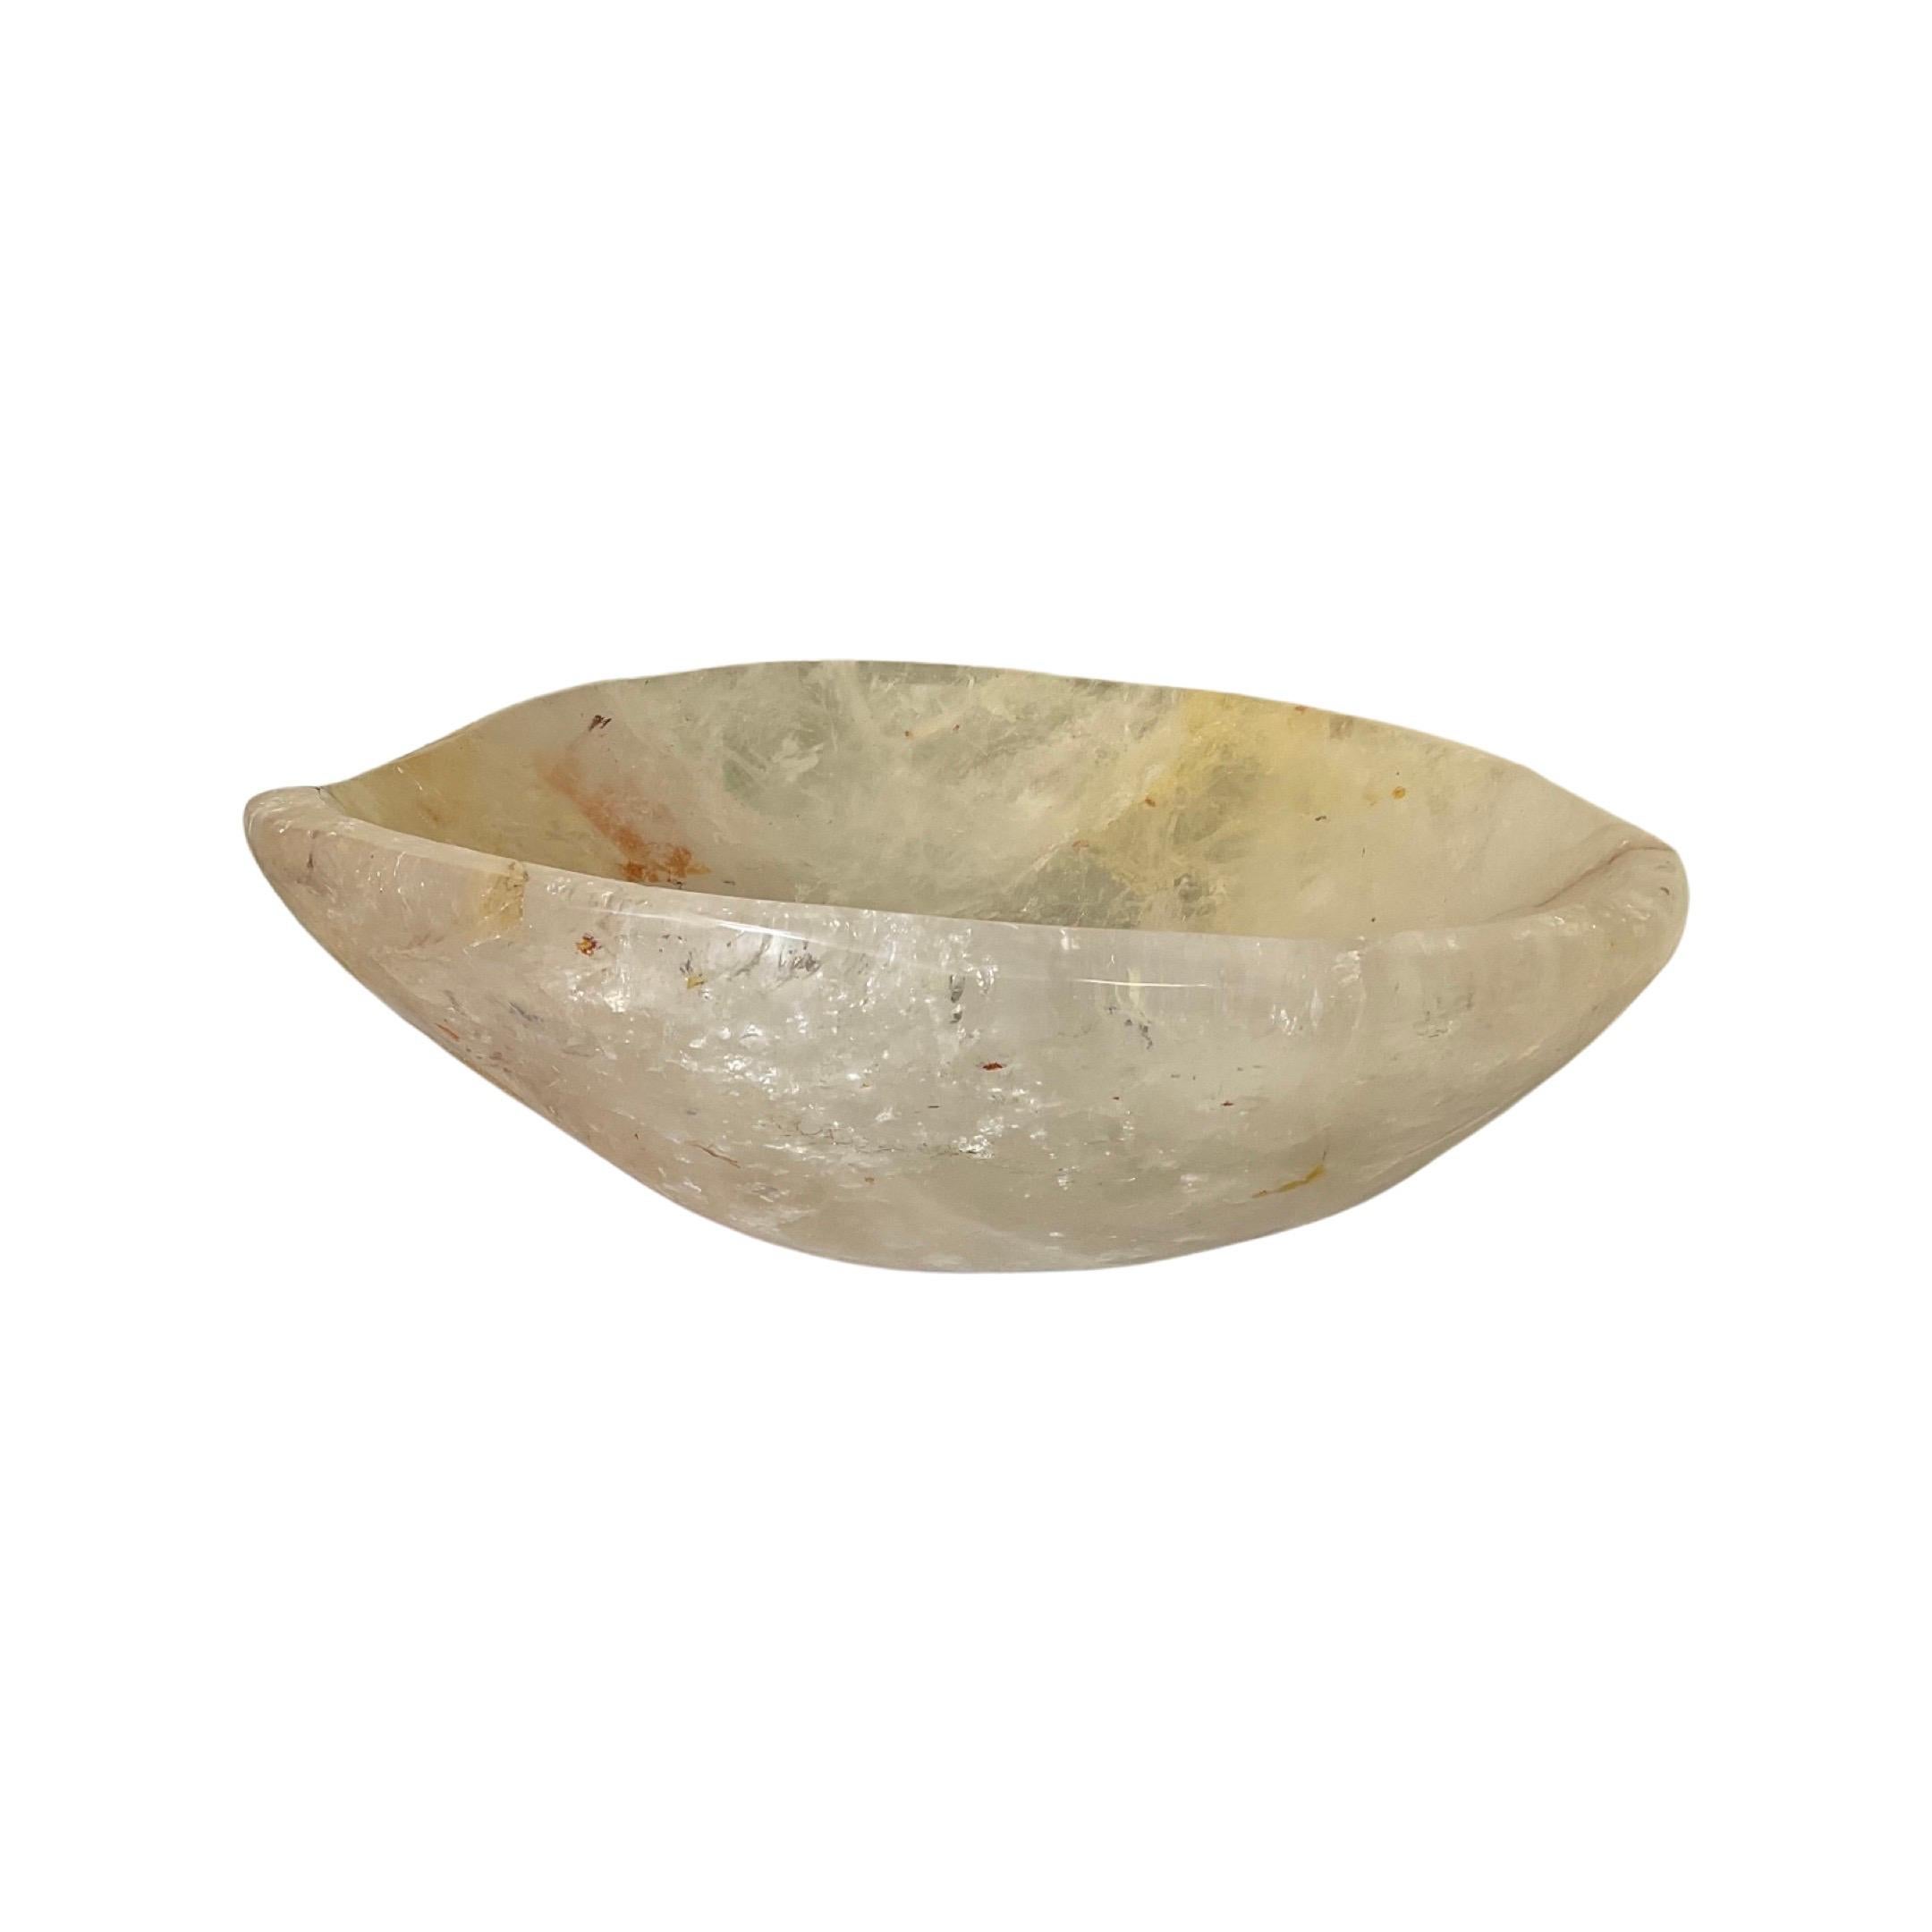 This polished Brazilian Rock Crystal Sink Bowl, crafted in 2010, adds sophistication to any bathroom. Providing an elegant focus, it offers both aesthetic value and increased longevity. Enjoy luxurious crystal features in your bathroom with this